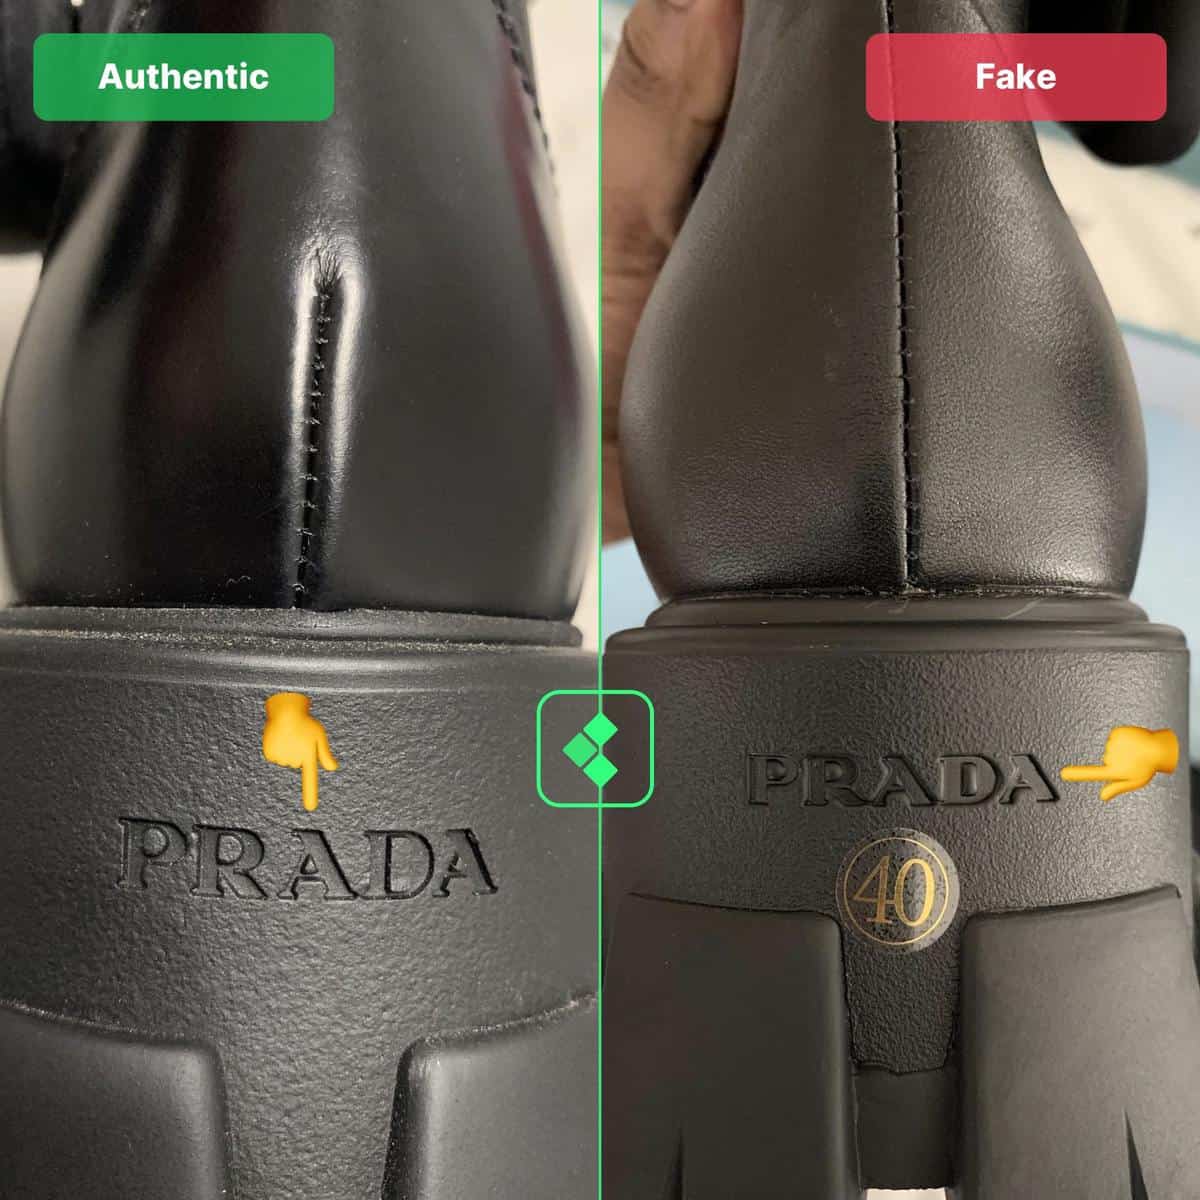 How To Spot Fake Prada Boots - Legit By Ch